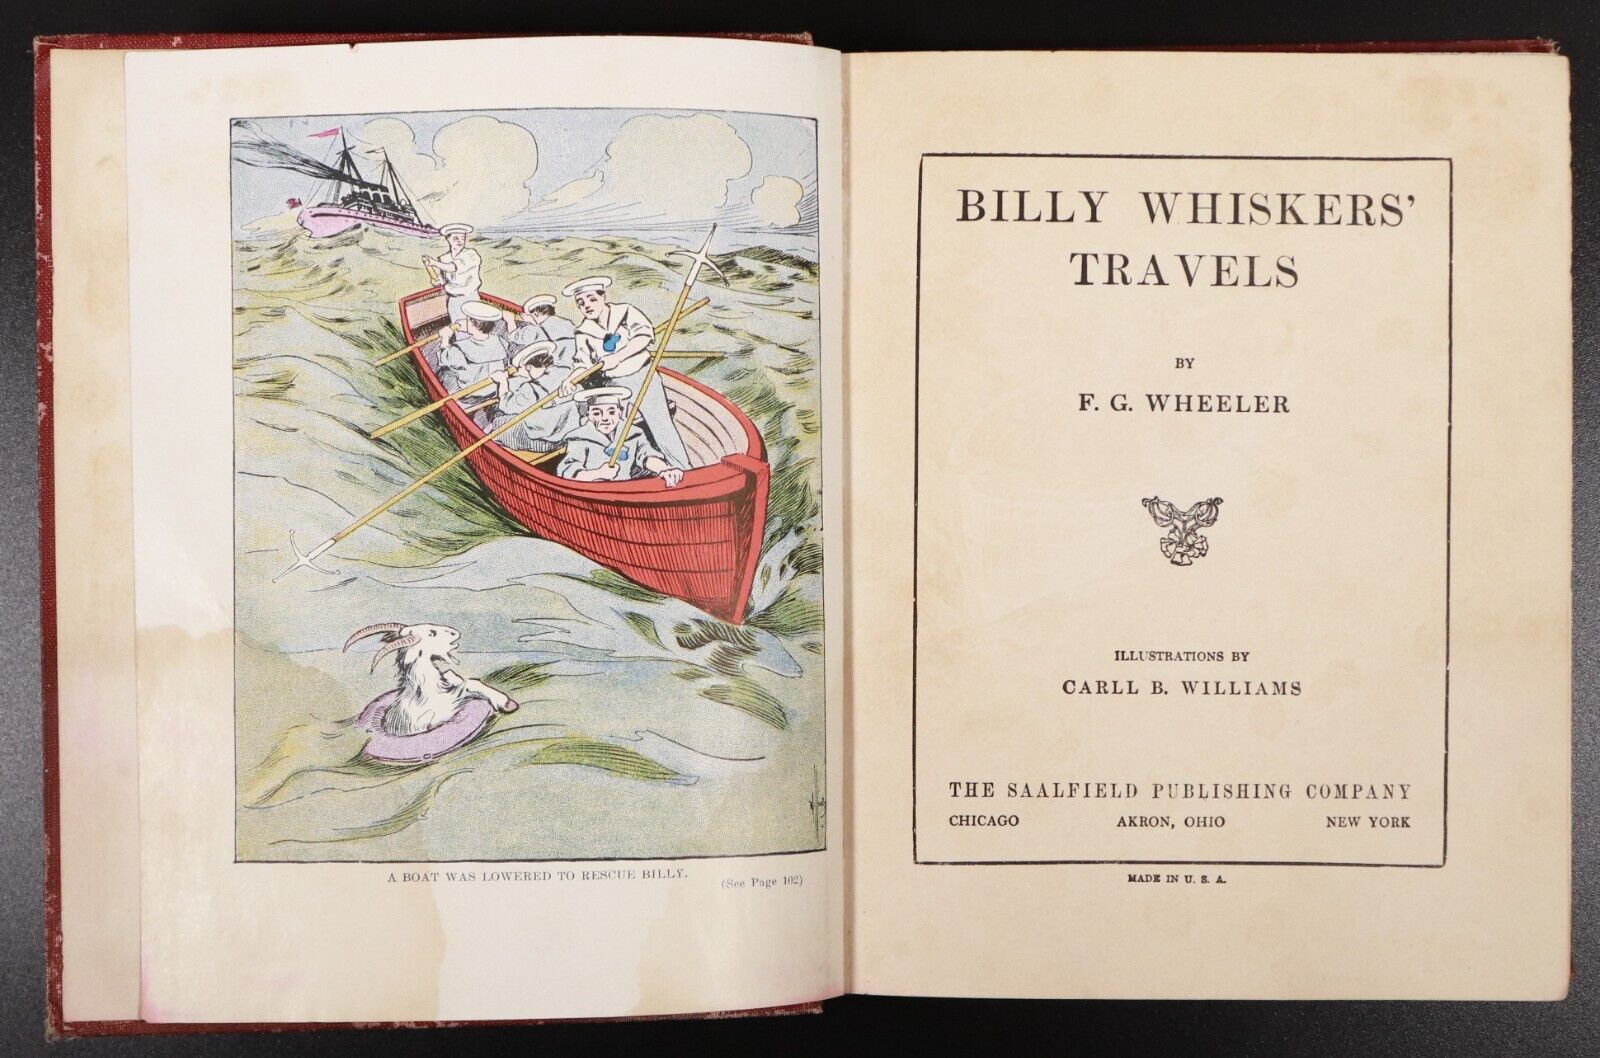 1907 Billy Whiskers' Travels by F.G. Wheeler Antique American Children's Book - 0